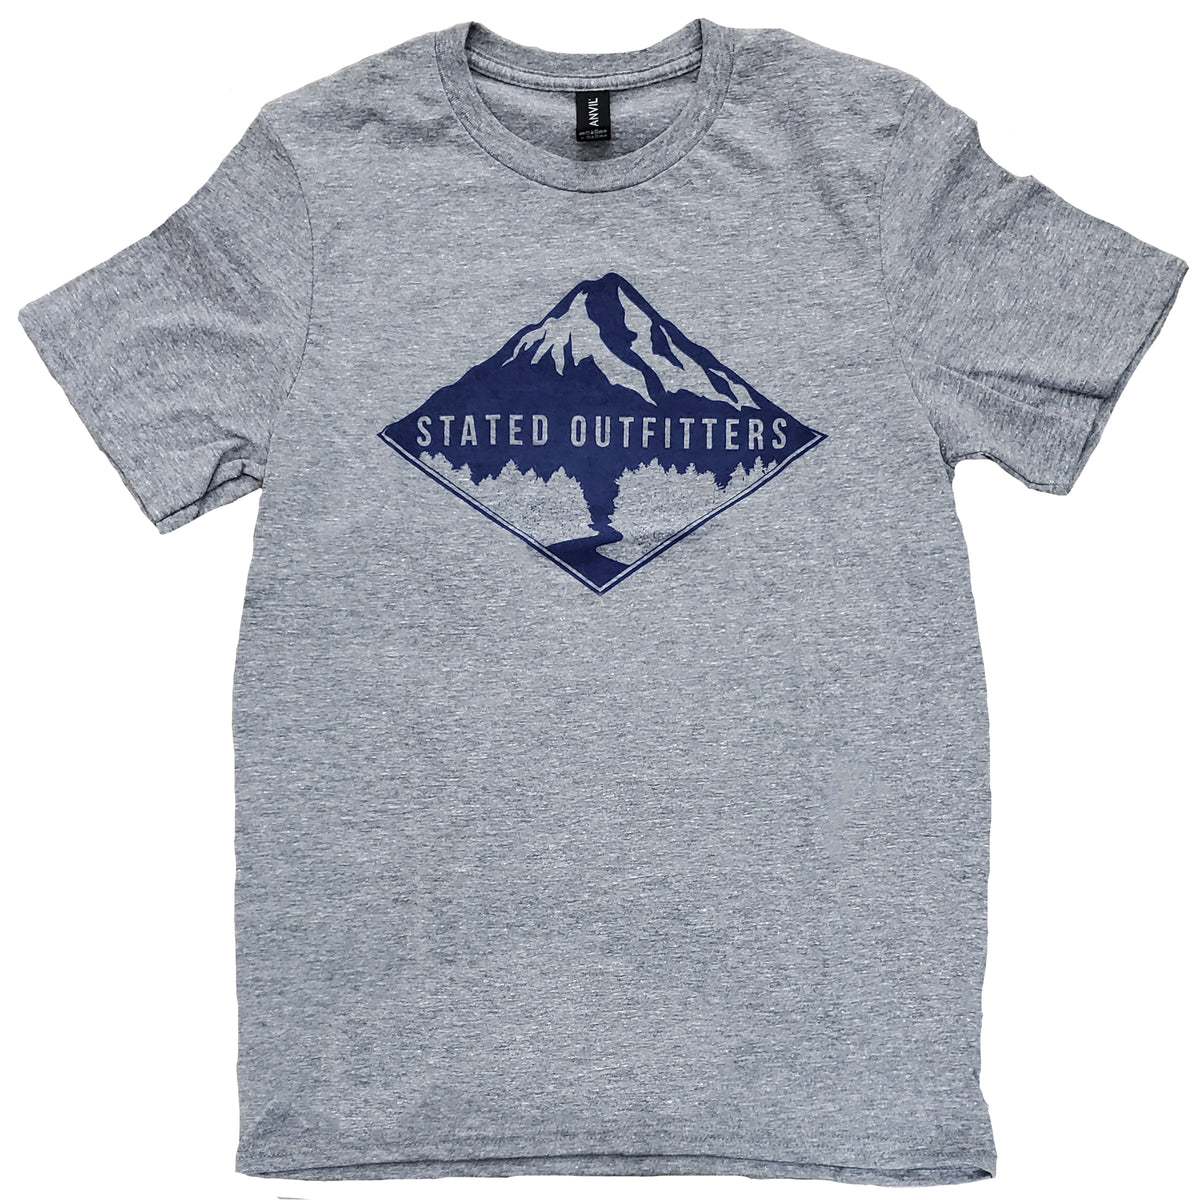 Stated Outfitters Mountain Tee